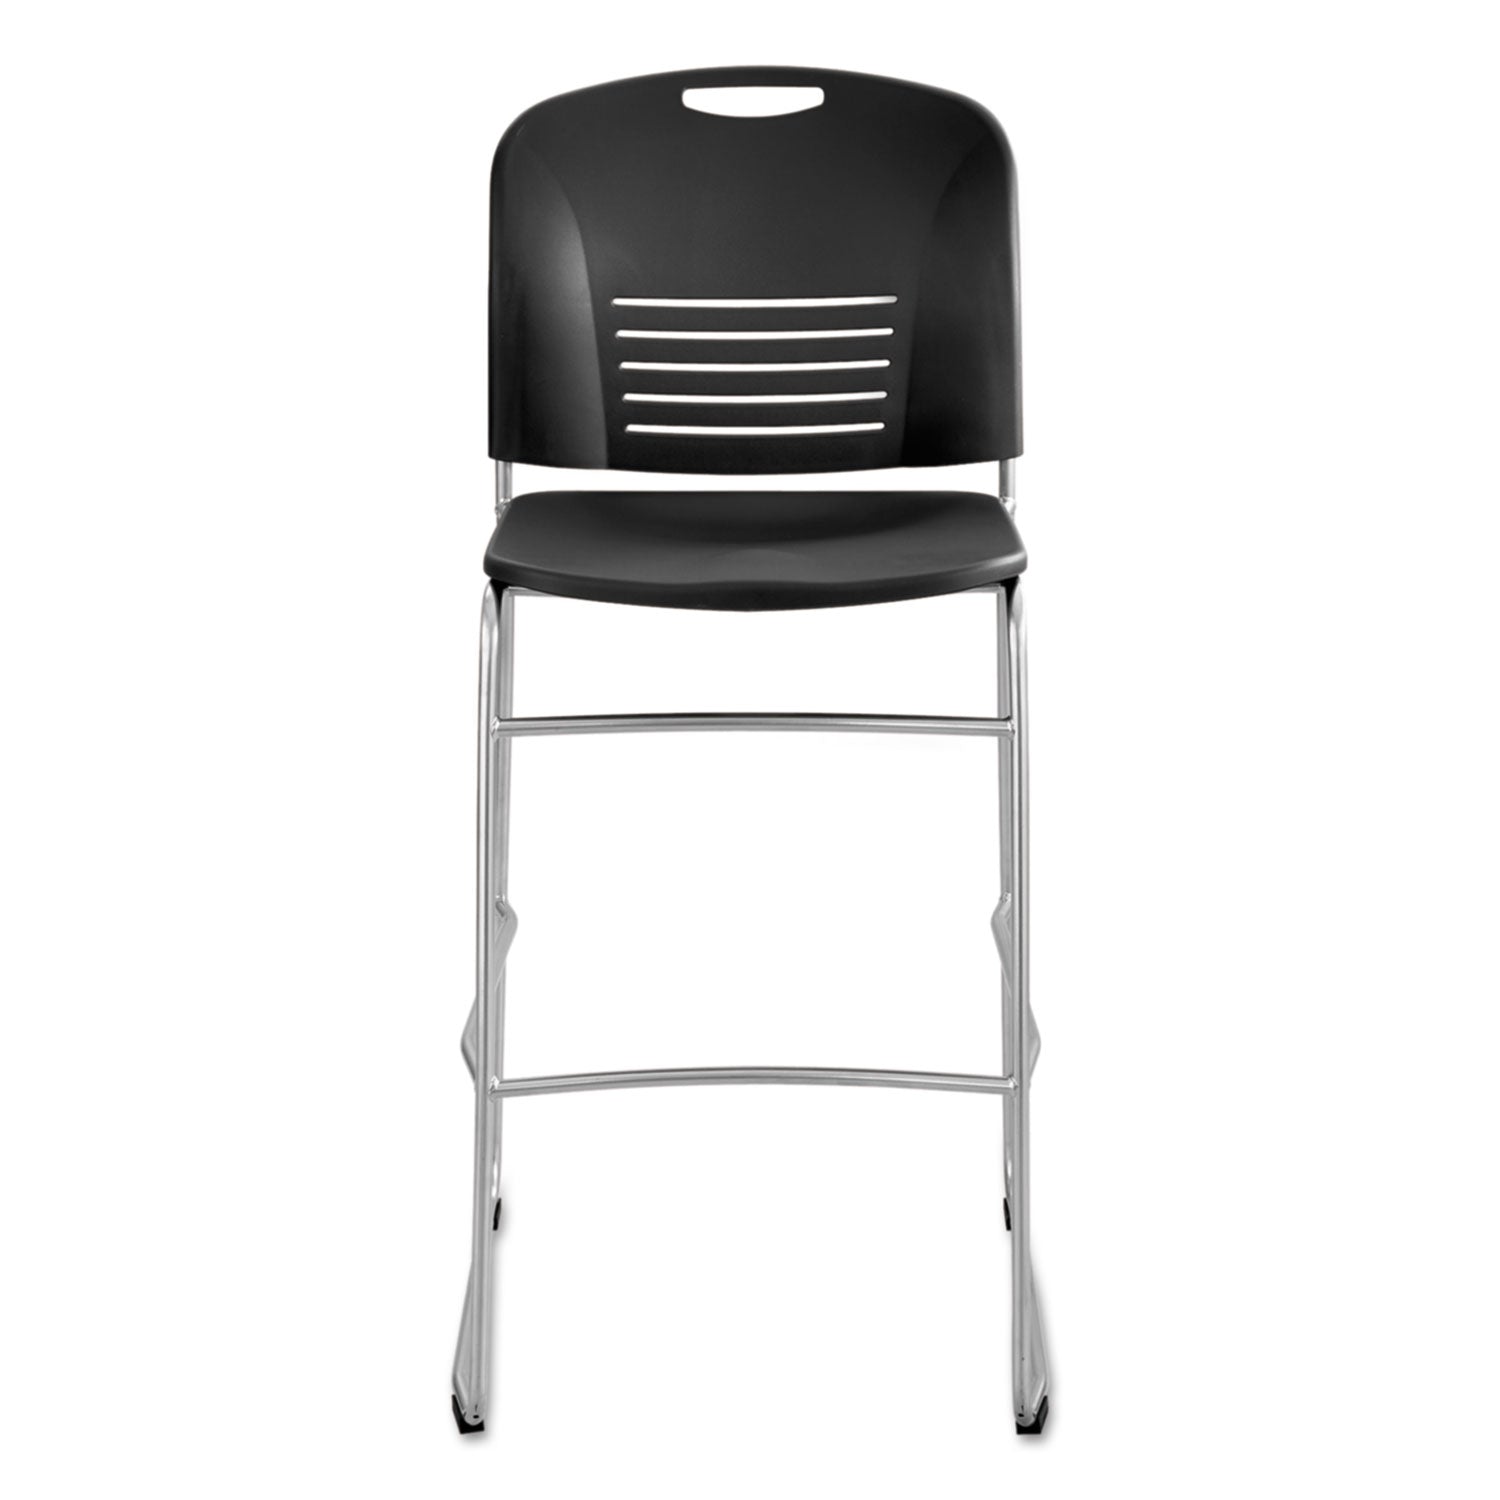 Vy Sled Base Bistro Chair, Supports Up to 350 lb, 30.5" Seat Height, Black Seat, Black Back, Silver Base - 